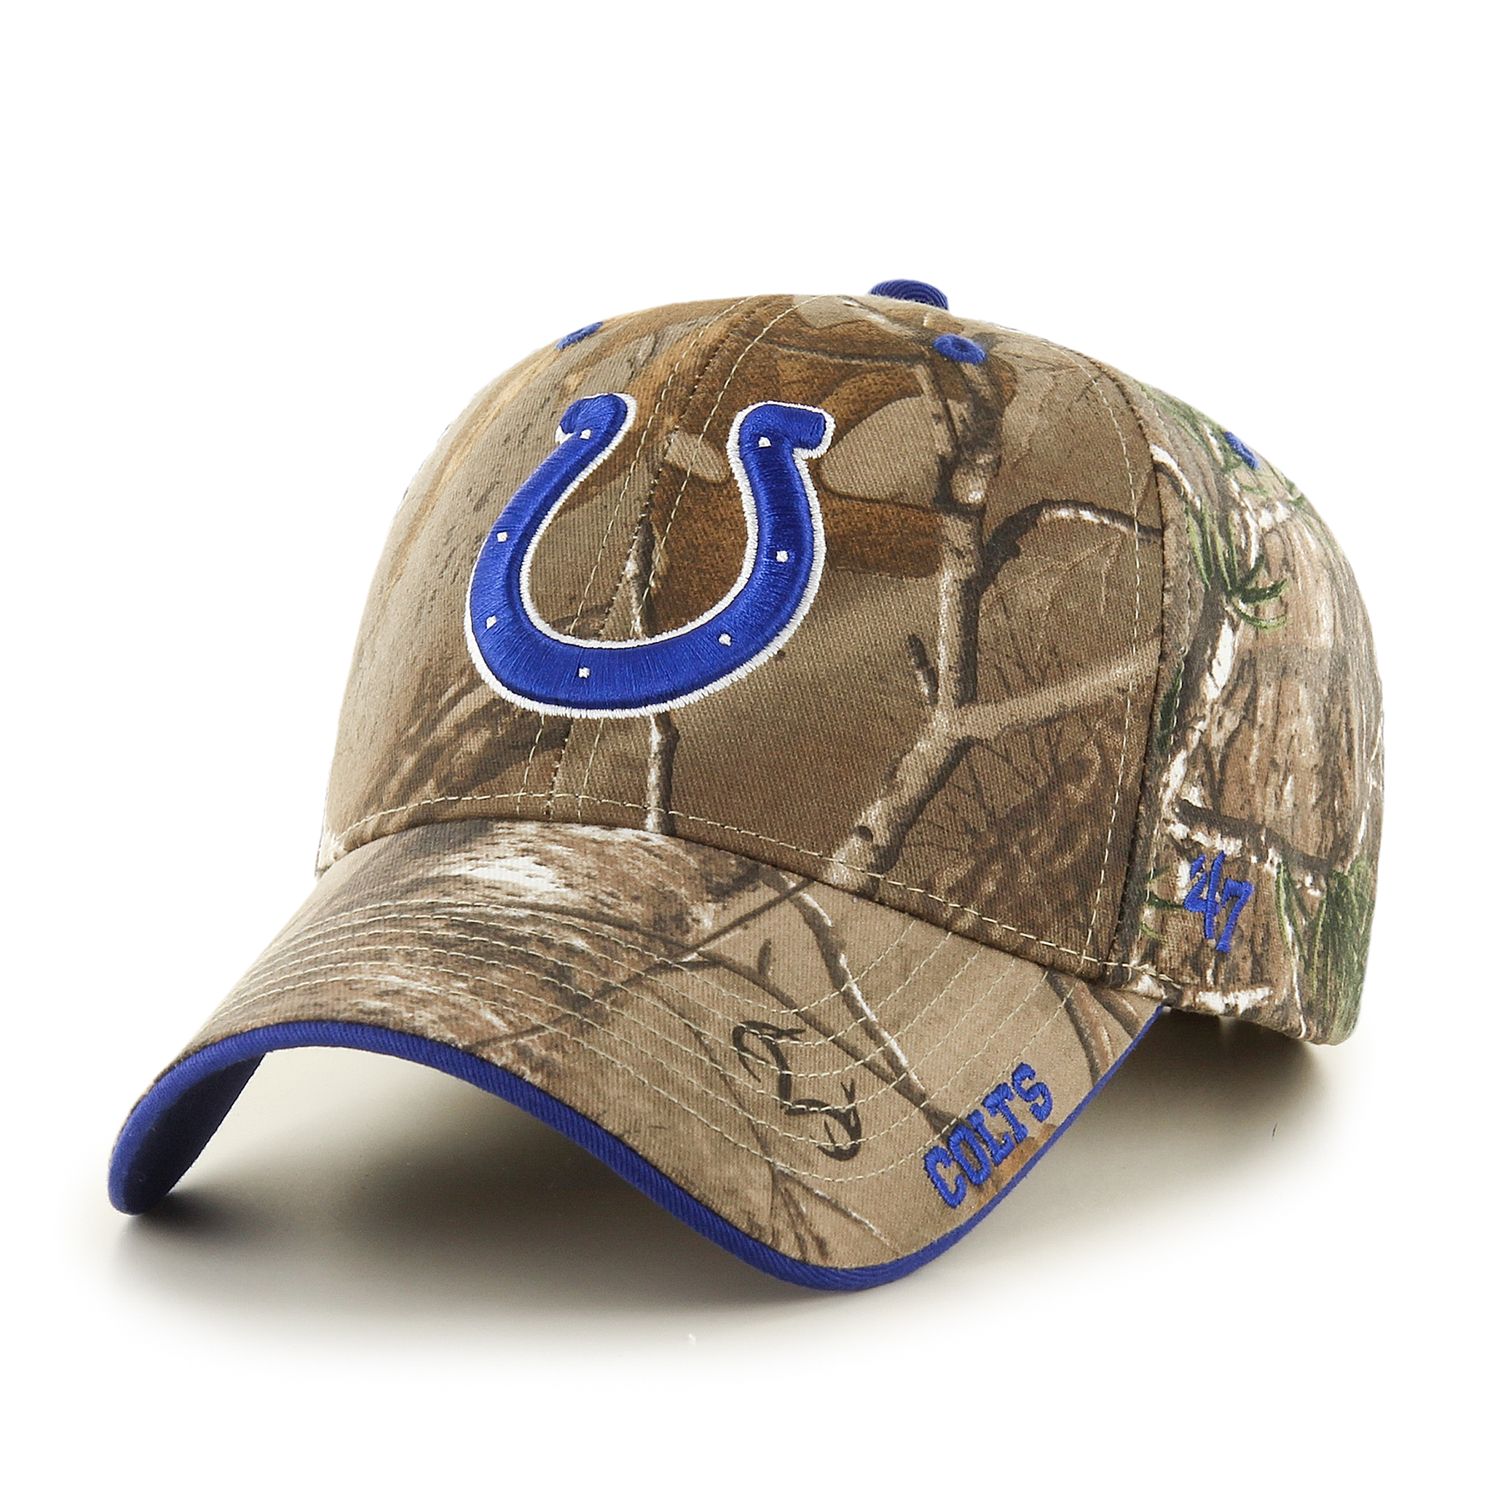 Frost Realtree Camouflage Adjustable Cap